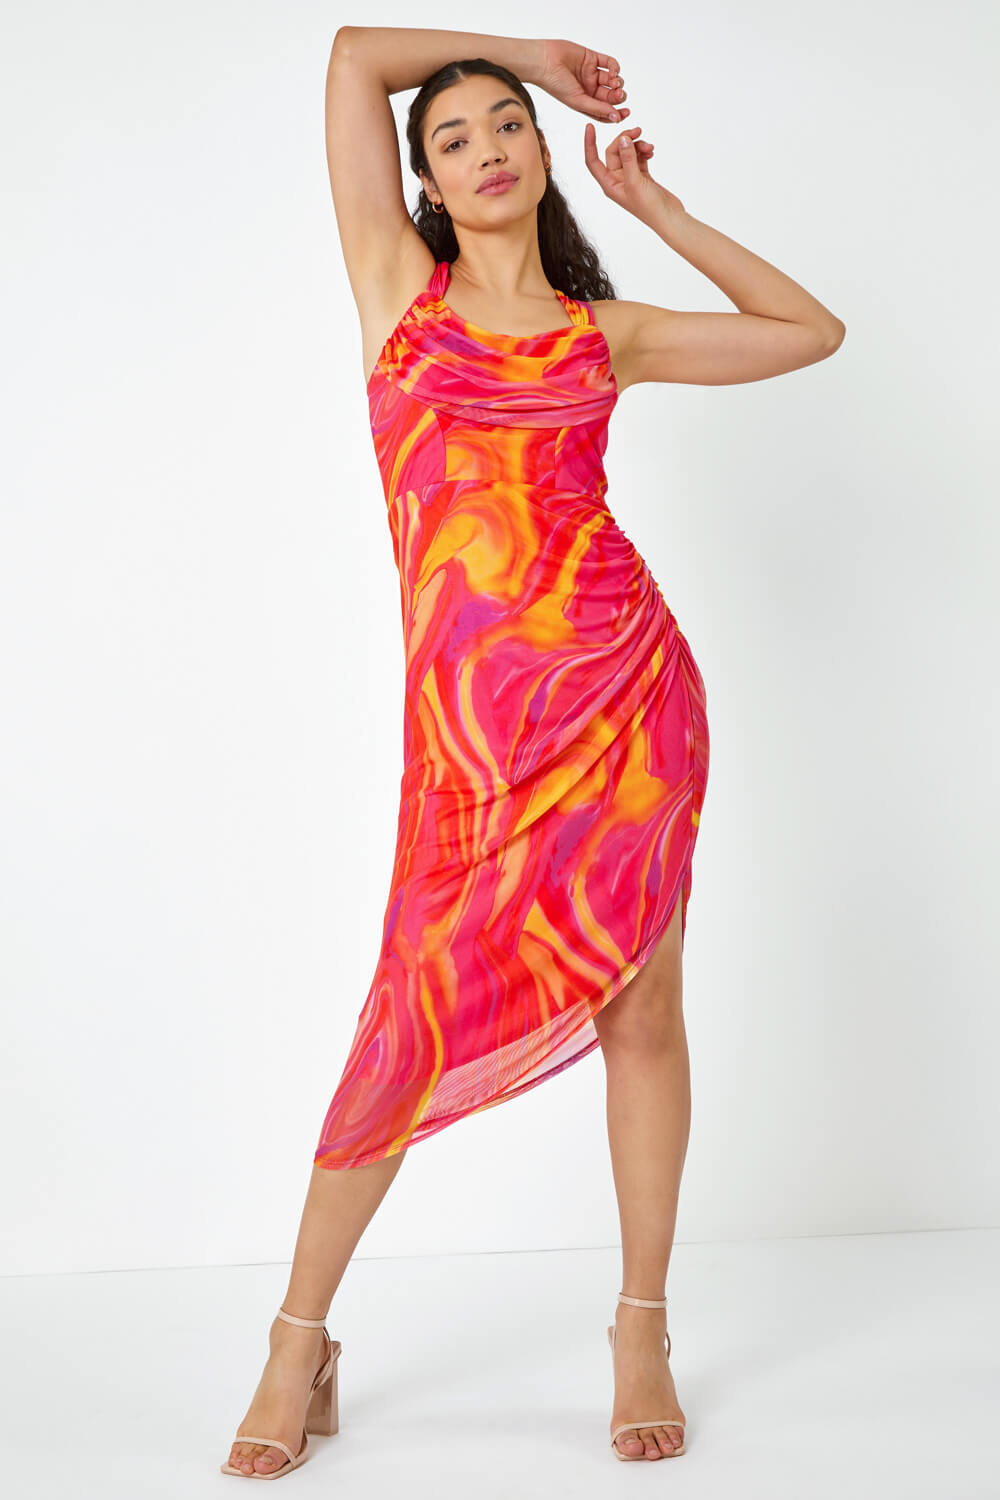 PINK Swirl Print Ruched Stretch Dress, Image 2 of 5